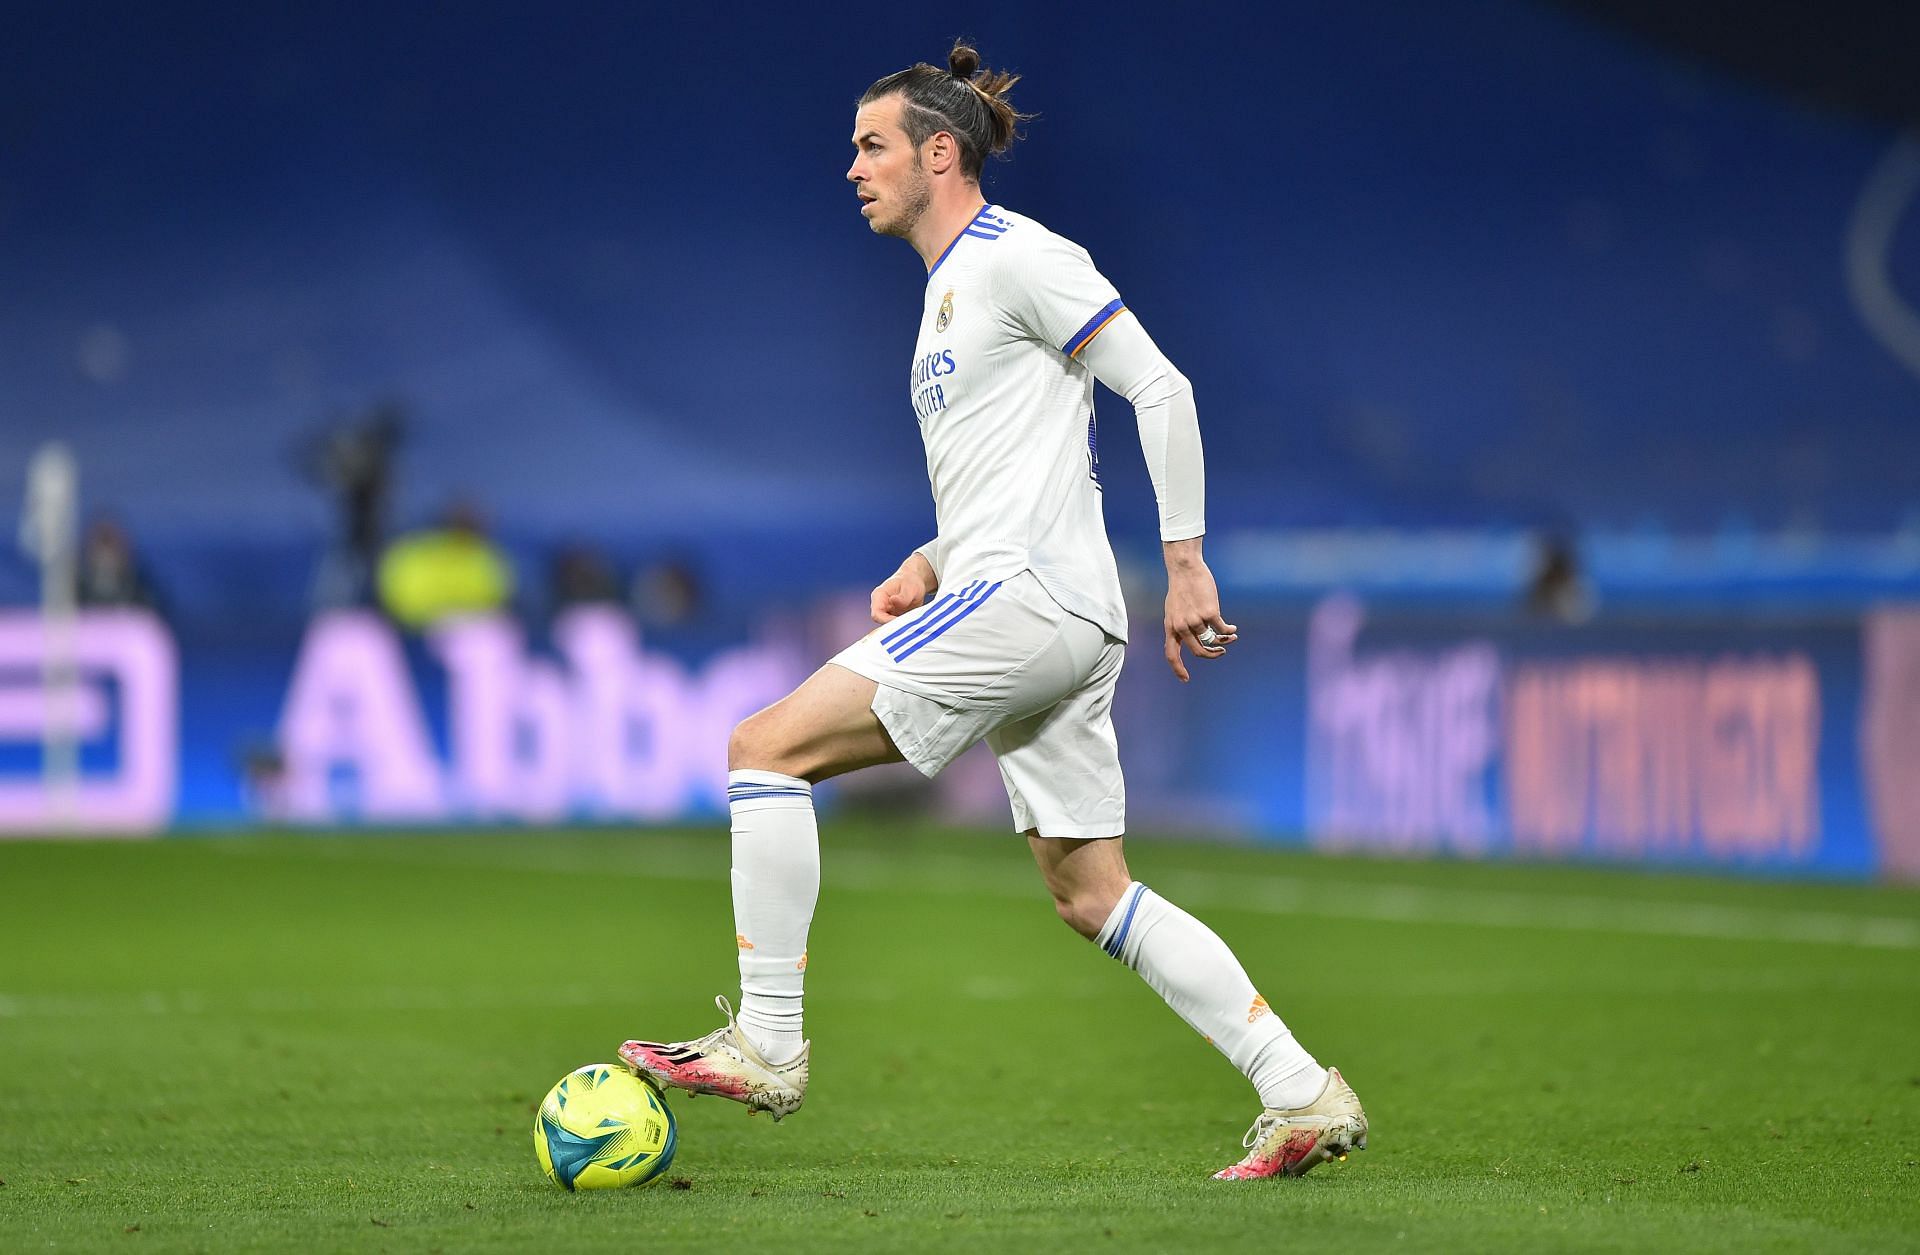 Getafe are looking to seal a transfer of Gareth Bale to their club